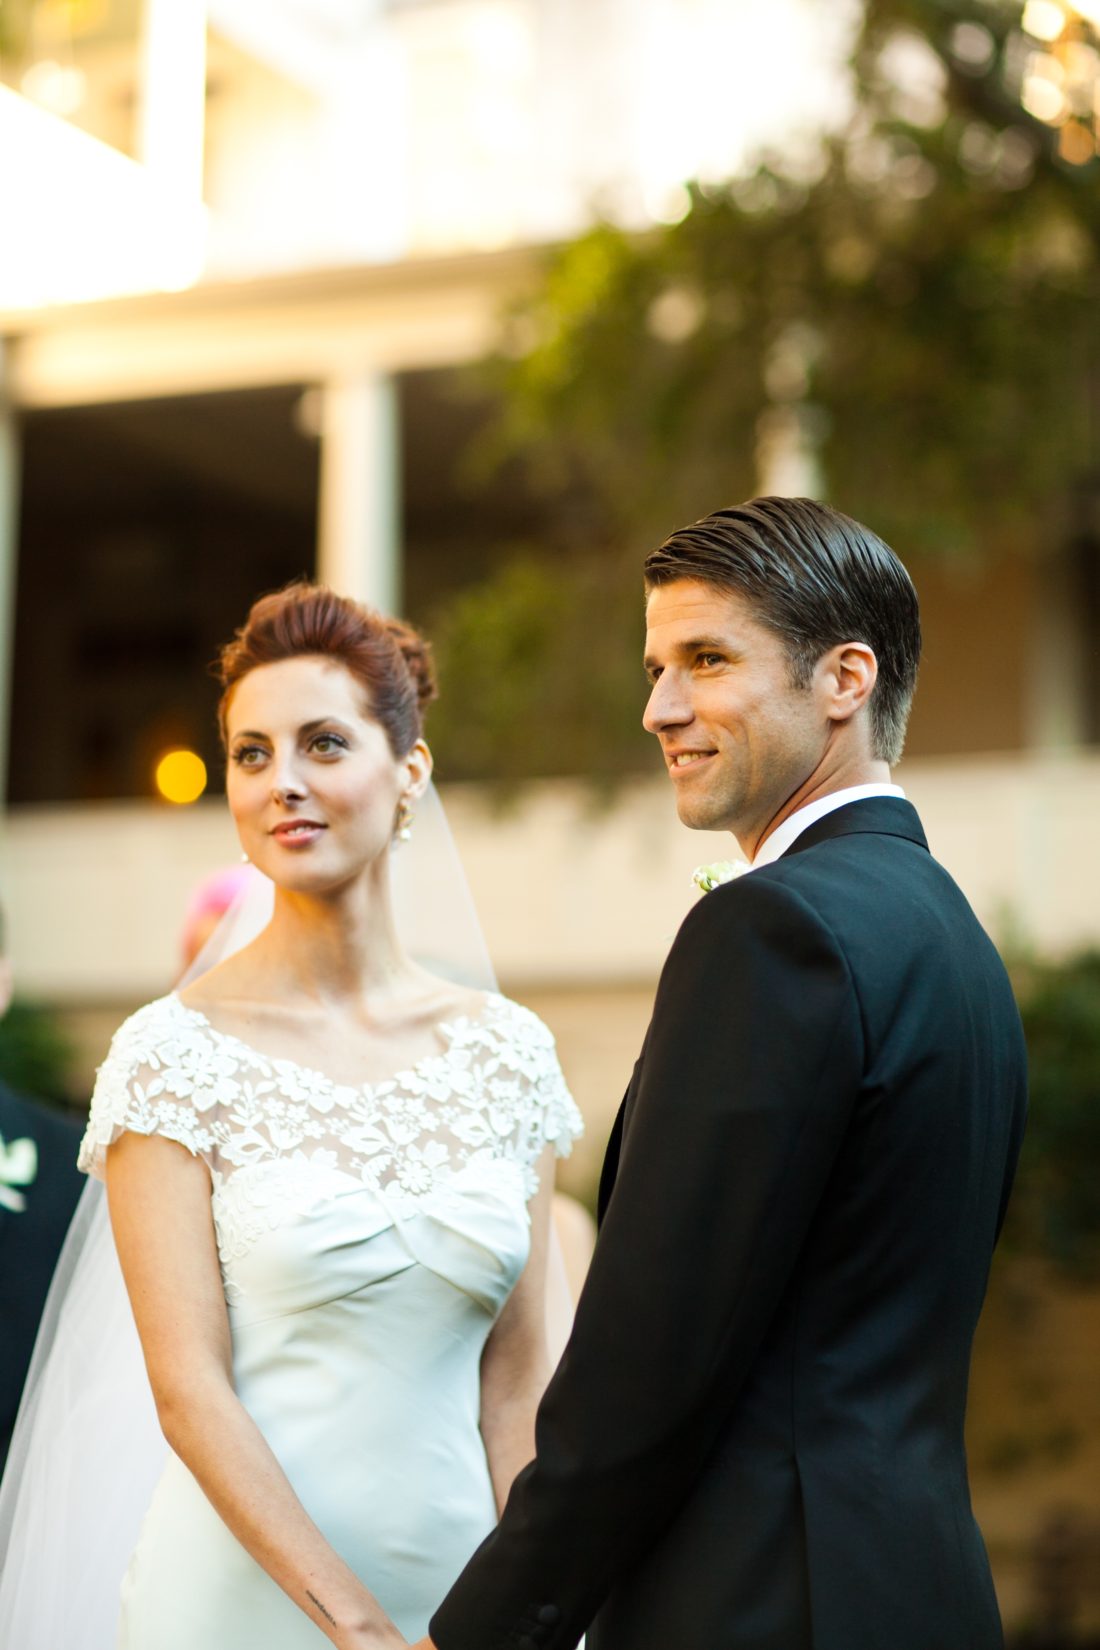 Eva Amurri Martino of lifestyle and motherhood blog Happily Eva After, wearing a white wedding dress with flower applique detail while holding hands with husband Kyle Martino wearing a black Brioni Tuxedo in Charleston South Carolina